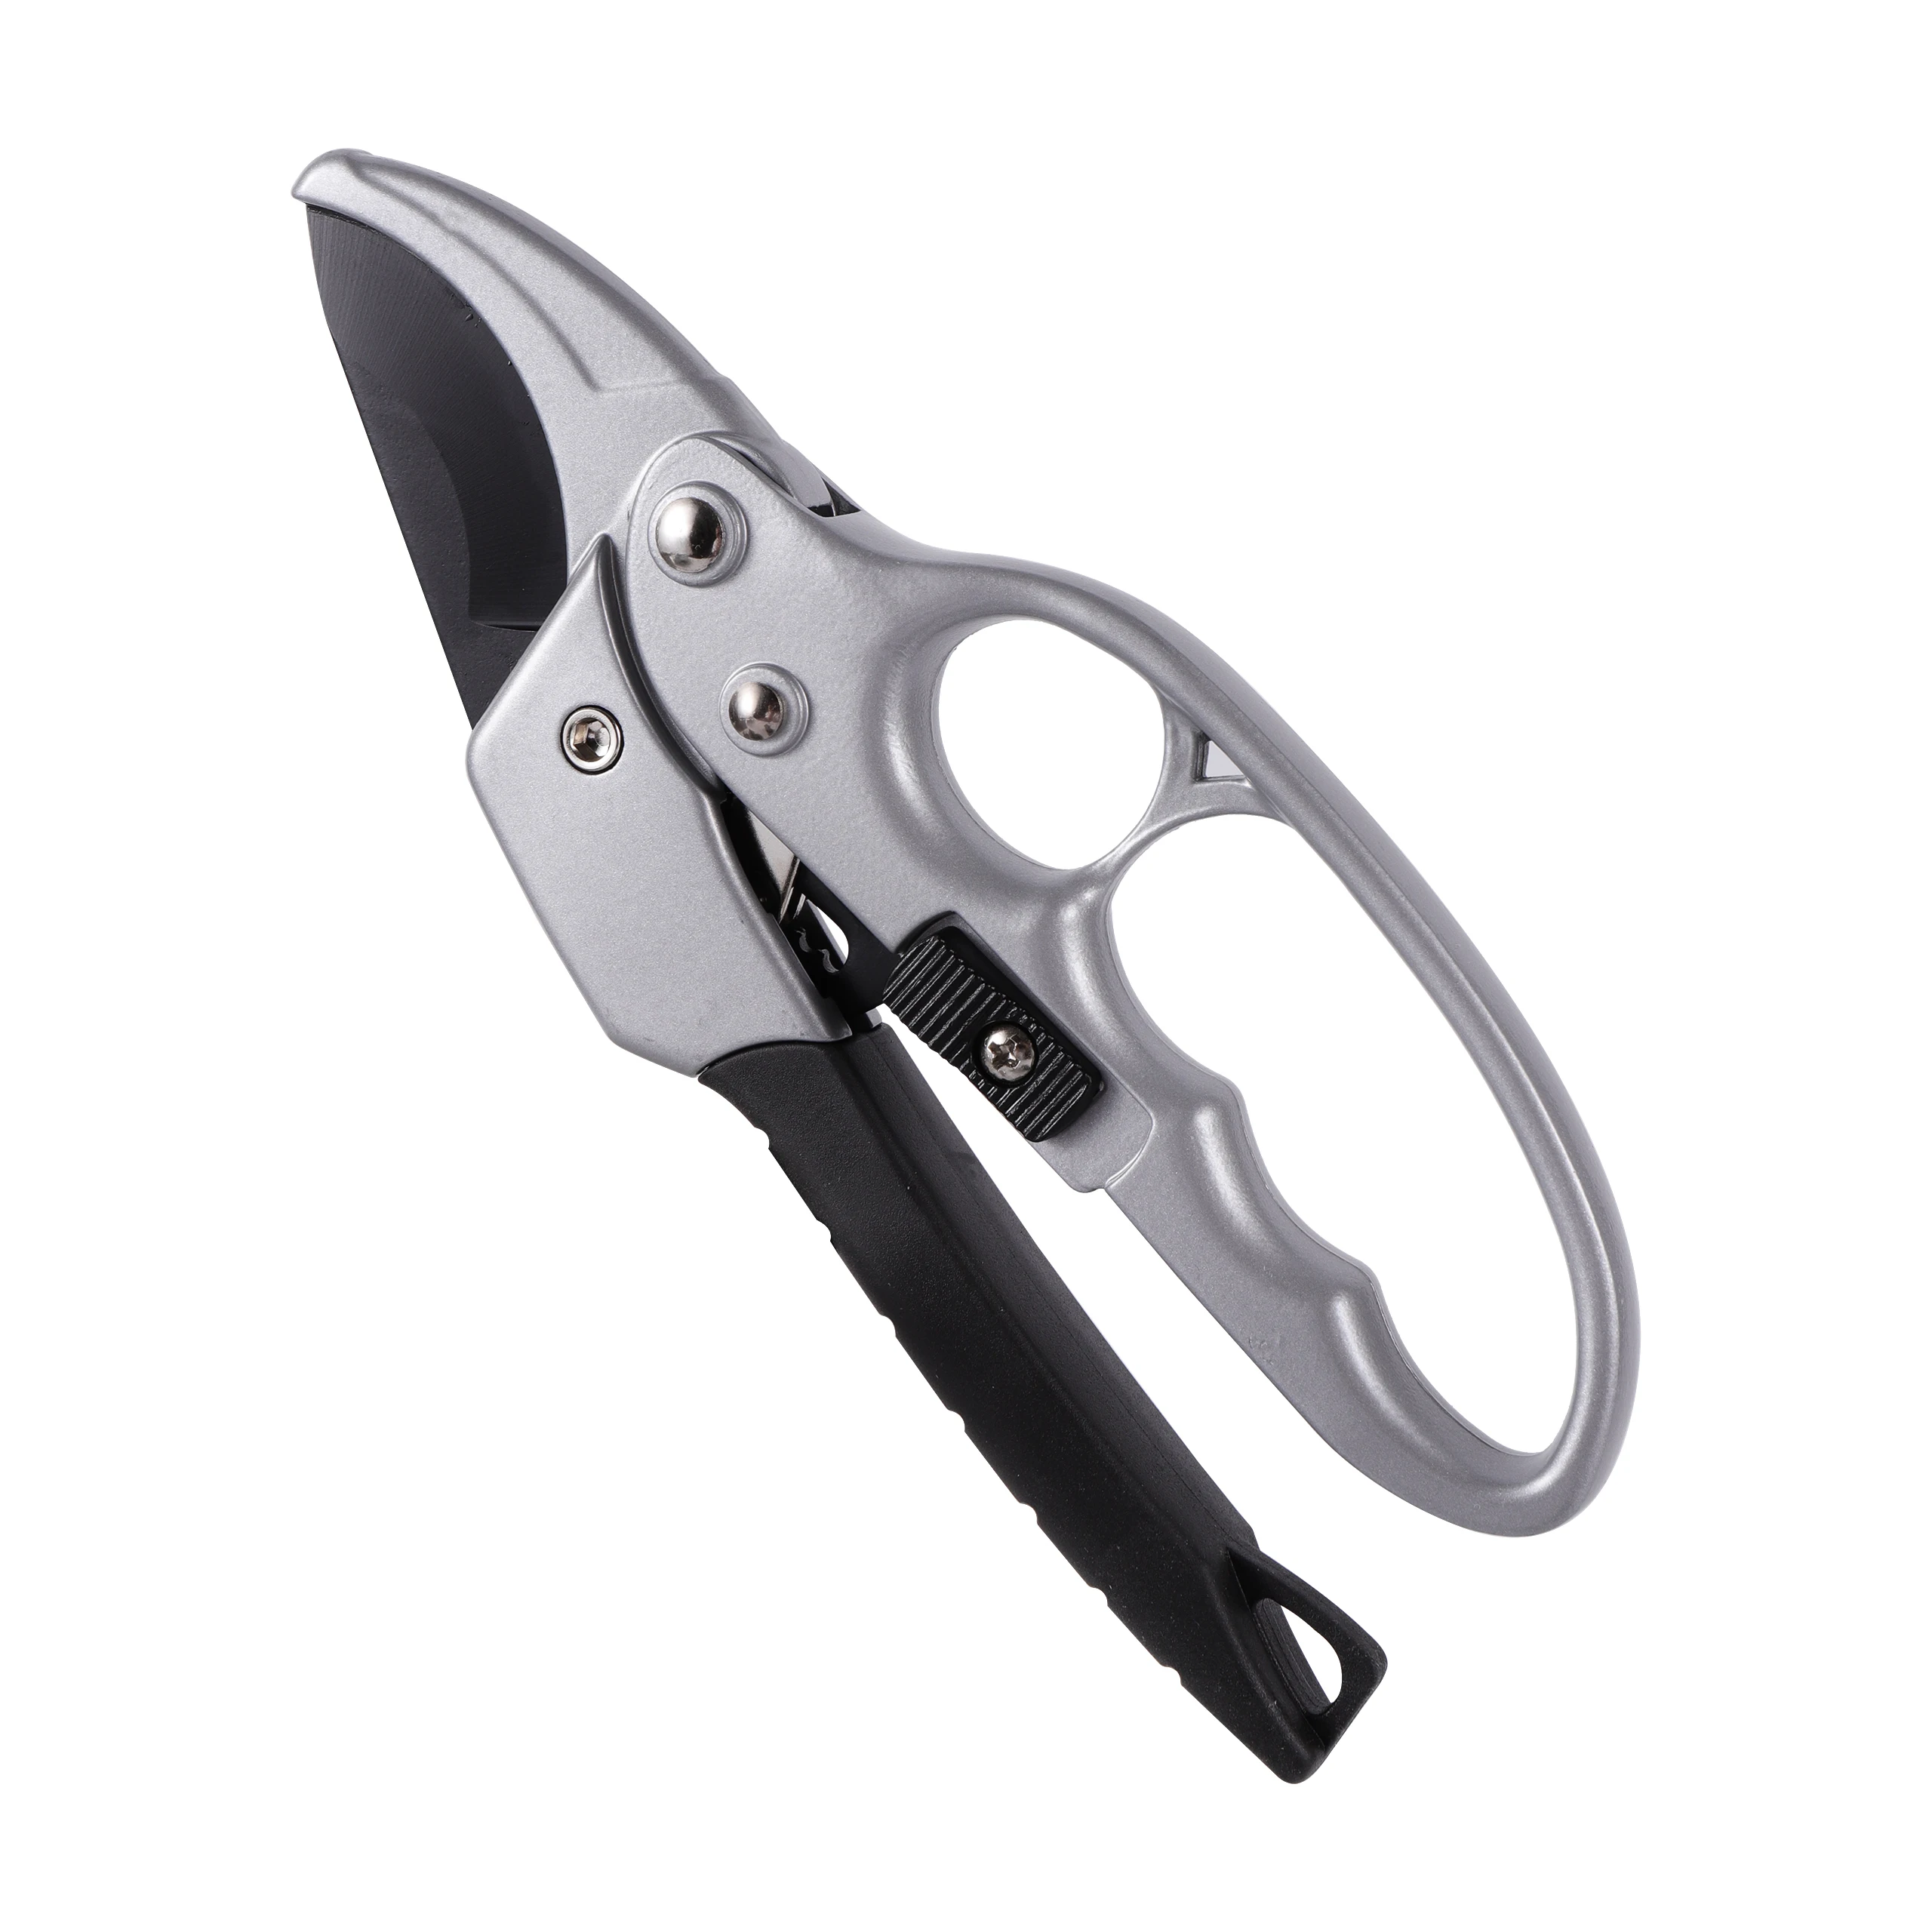 

SK5 Steel Pruner, Sharp Bypass Pruning Shears, Tree Trimmers, Secateurs, Gardening Hand Grafting Clippers, Fruit Picking Tools